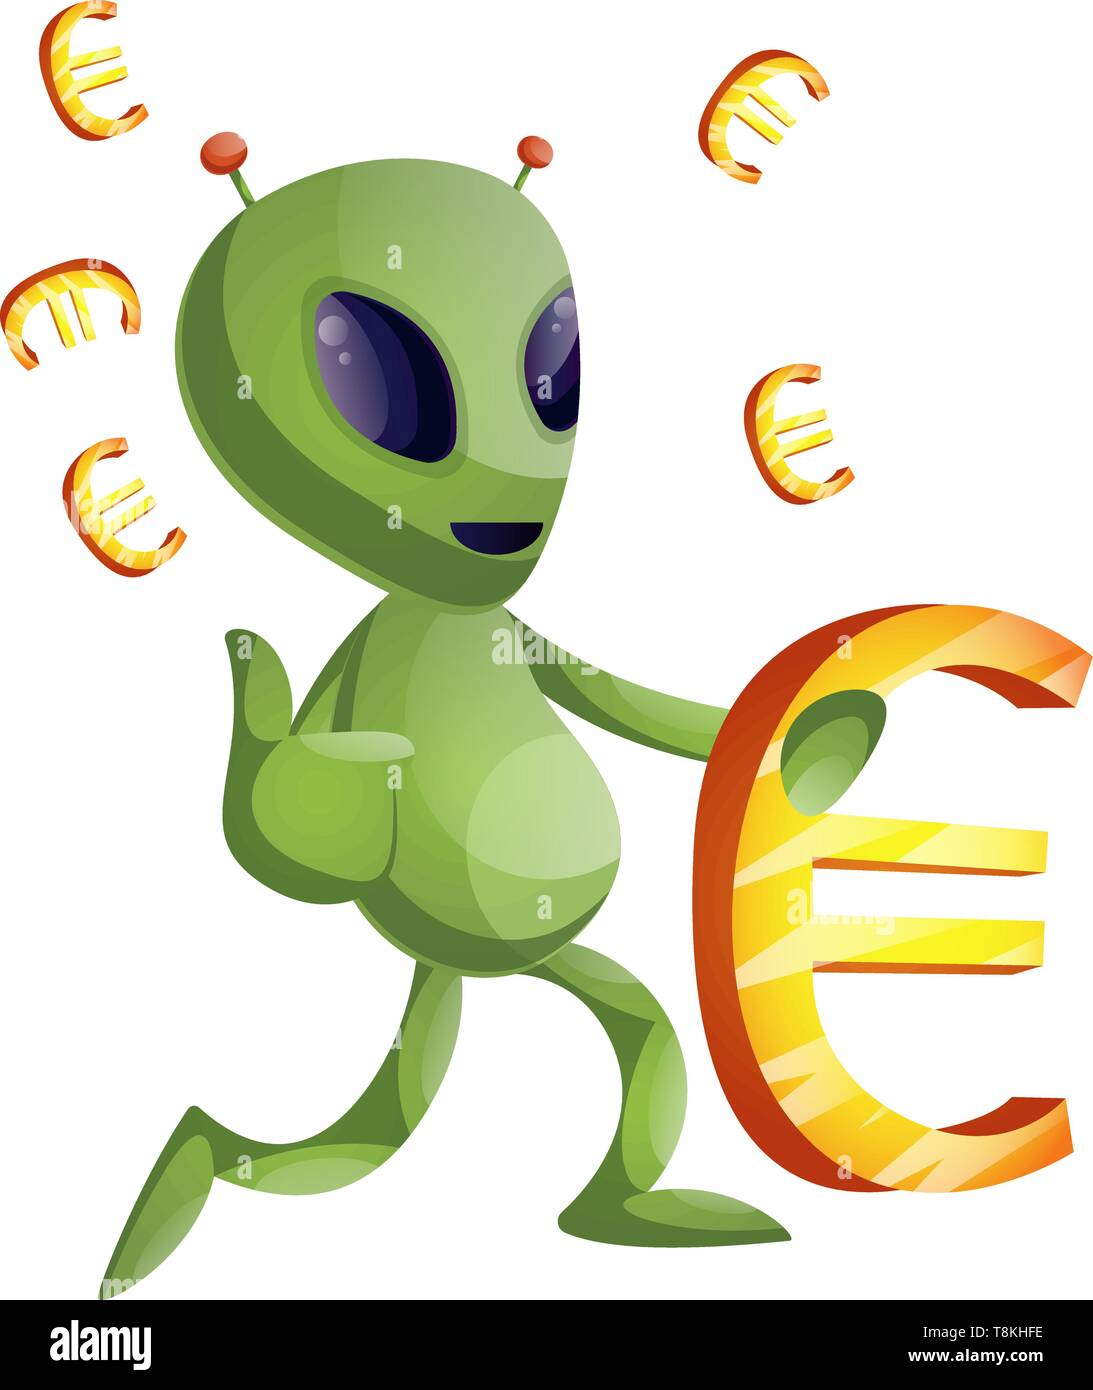 Alien with euro sign, illustration, vector on white background. Stock Vector